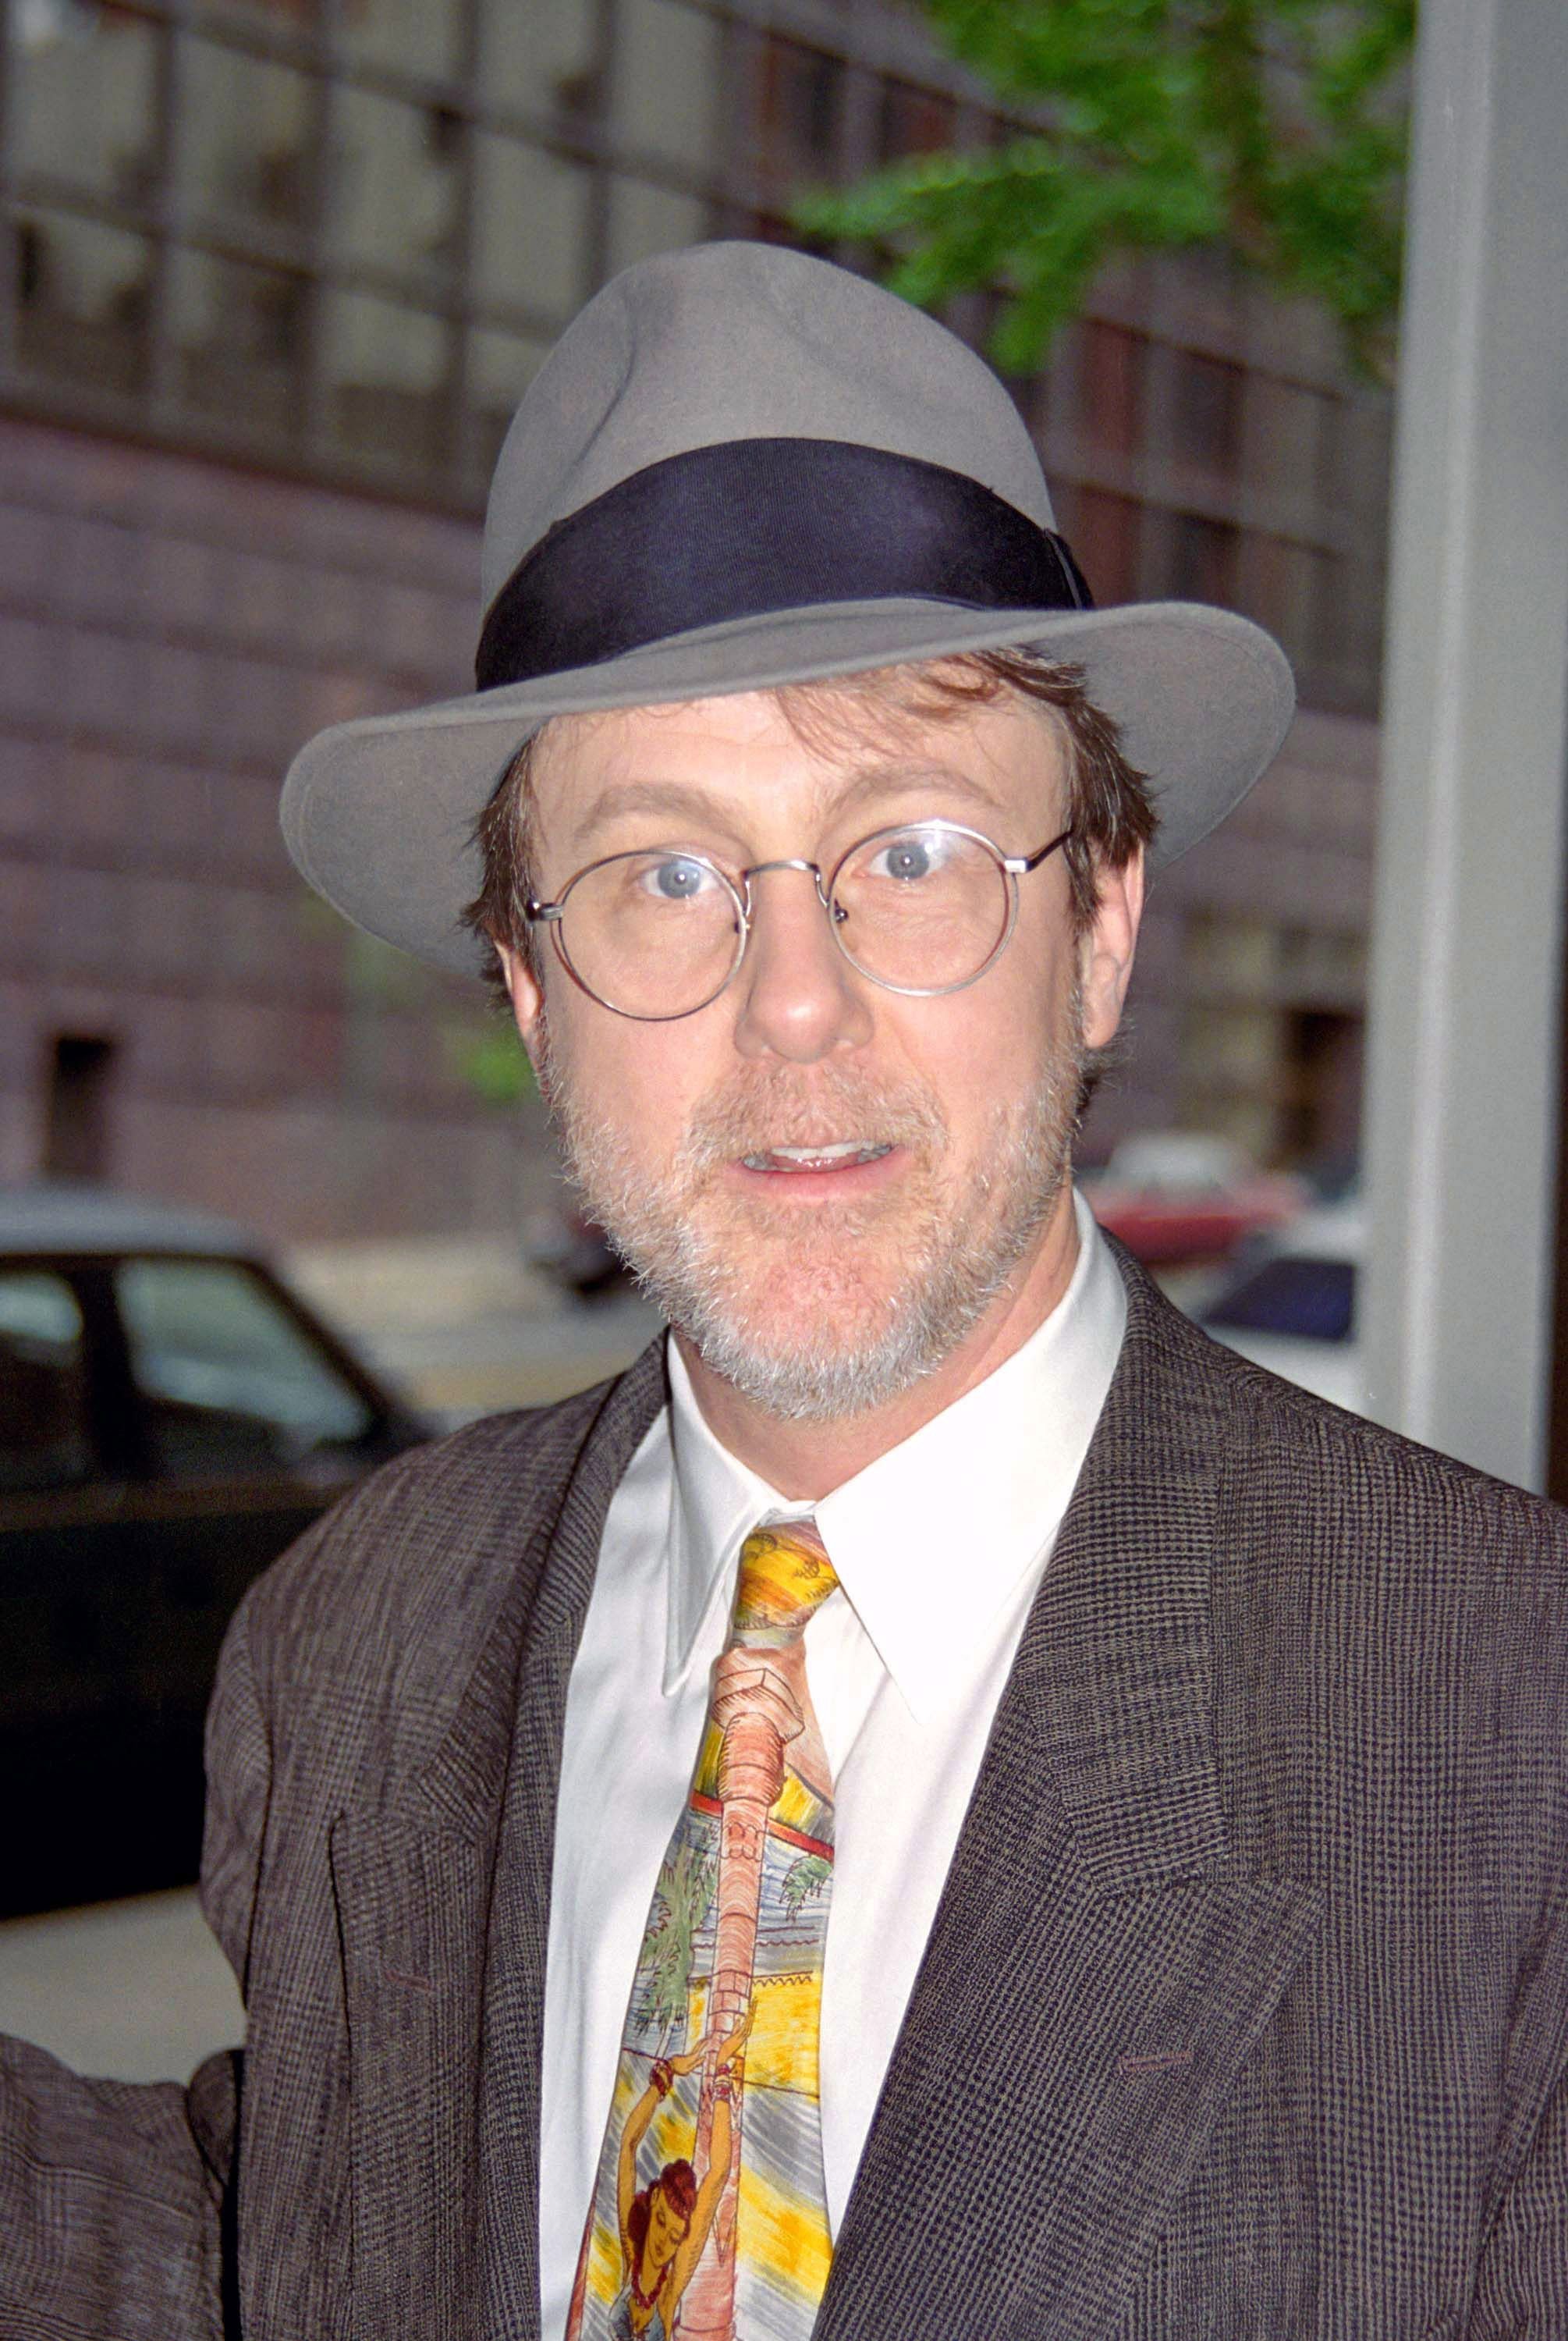 Harry Anderson appearing on the "CBS Morning Show" on November 20, 1996, at CBS Studio in New York City | Photo: Derek Storm/FilmMagic/Getty Images